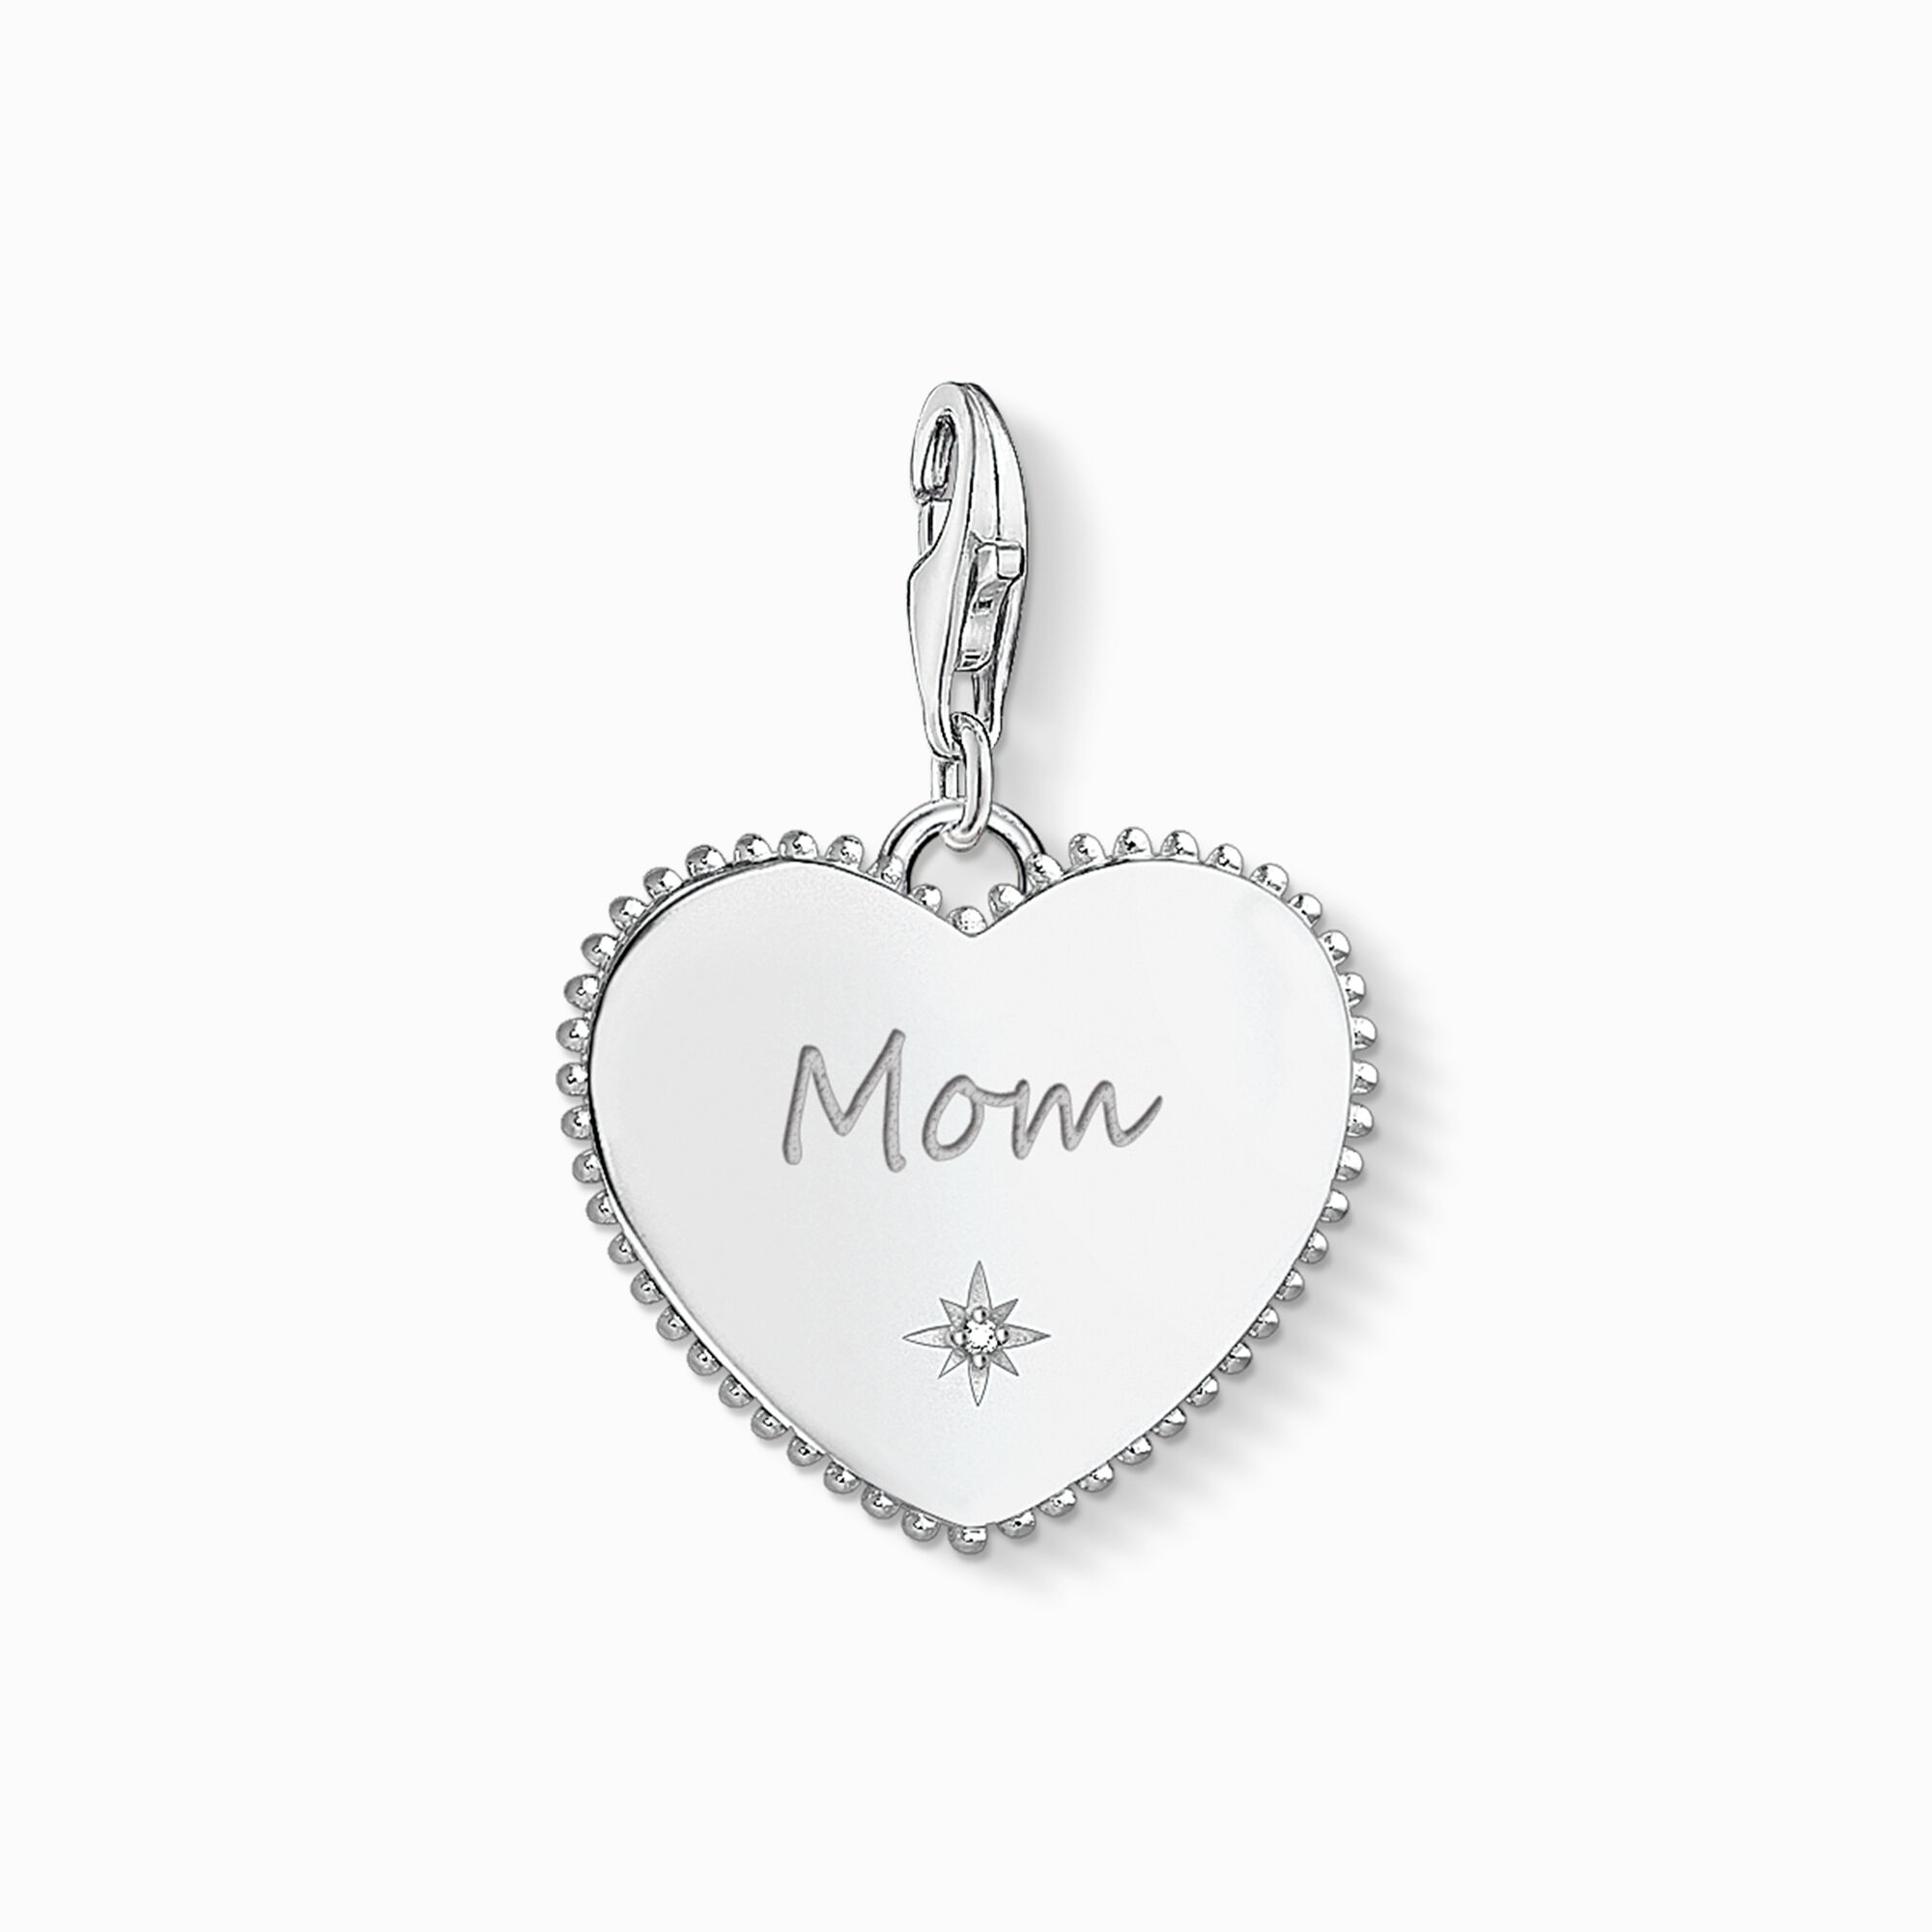 Charm pendant Heart mom silver from the Charm Club collection in the THOMAS SABO online store